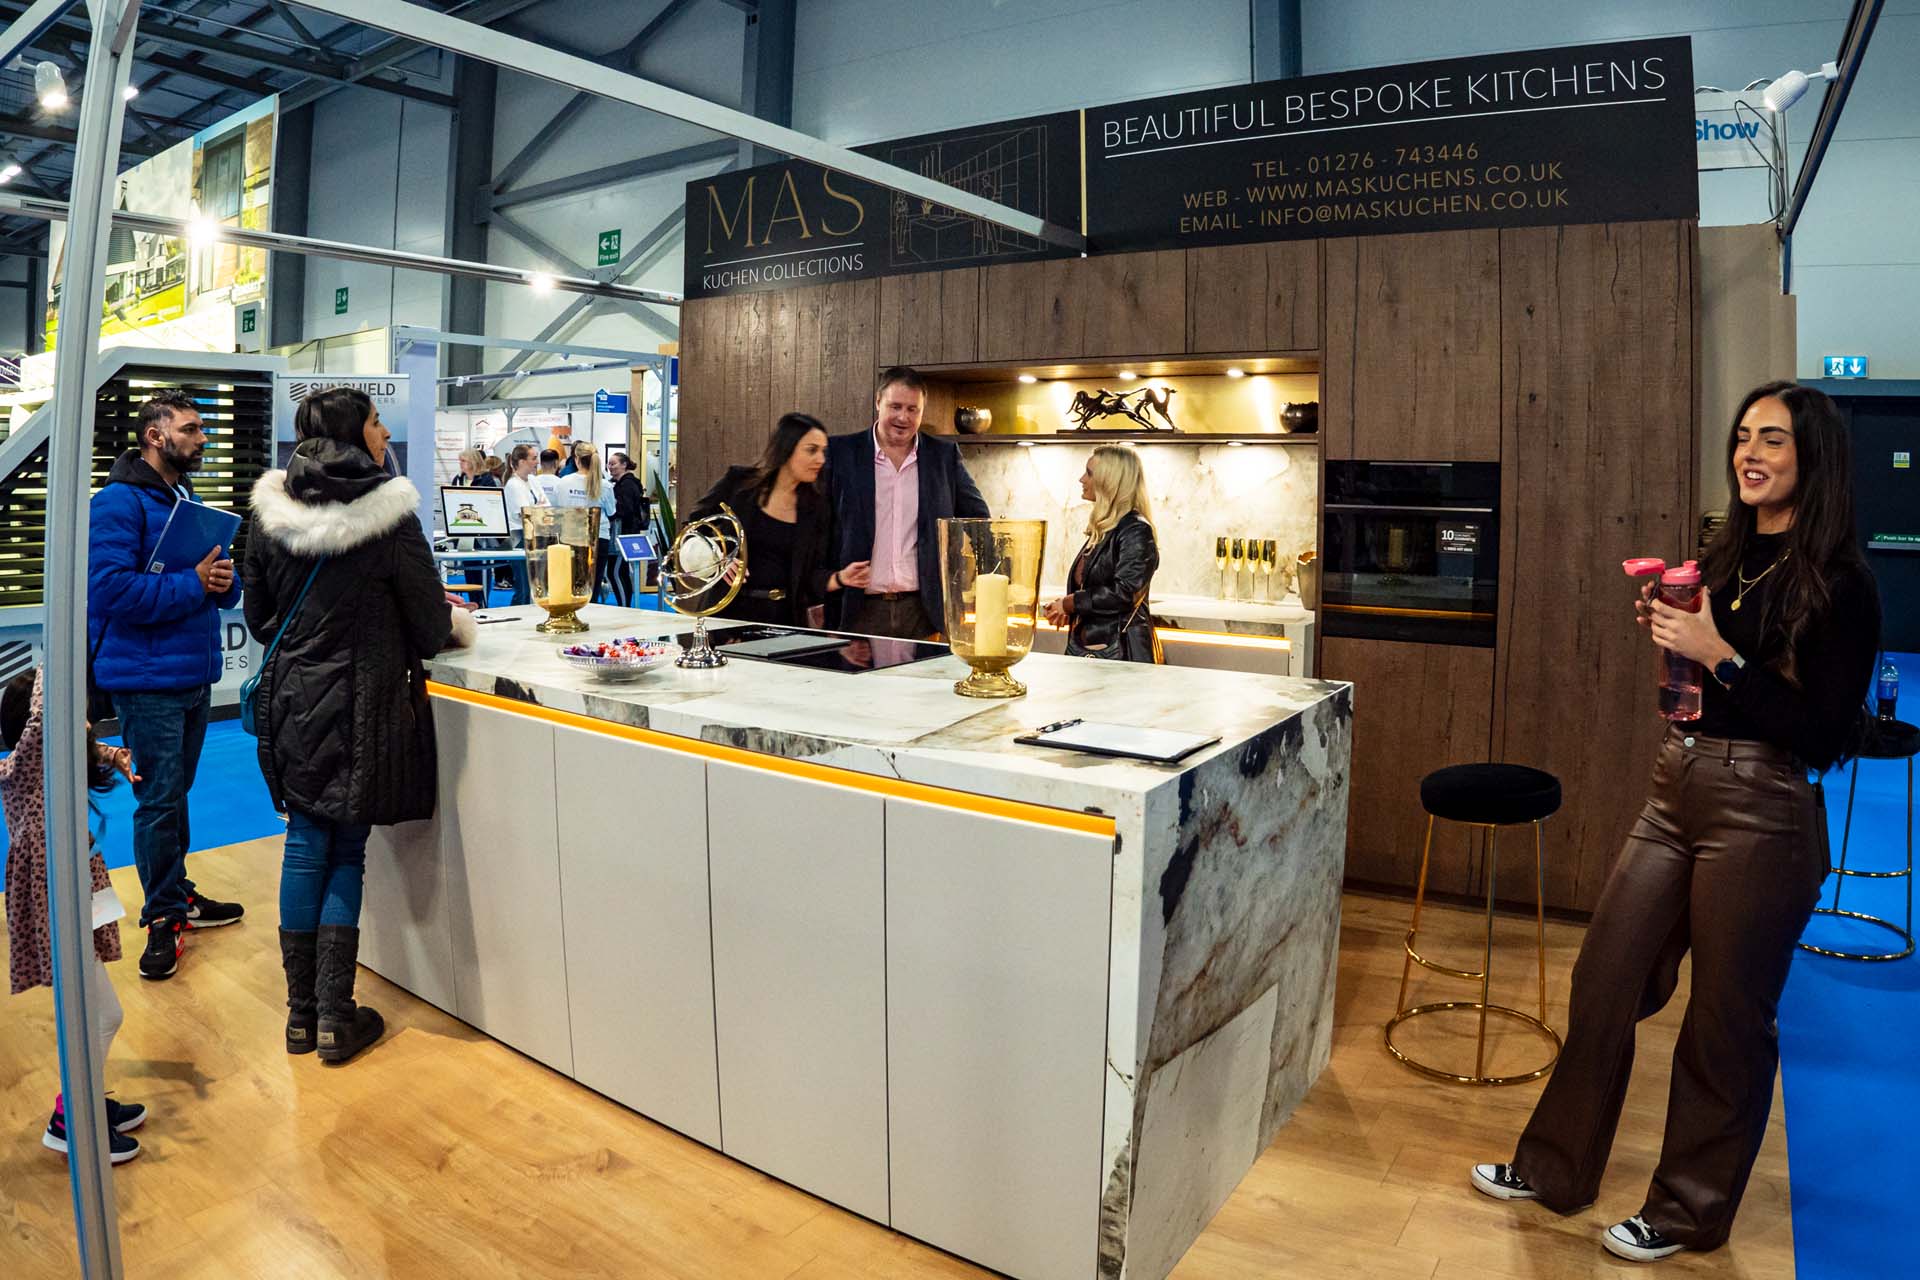 Mas Kitchen Kuchen Collections stand at the HBR show Farnborough